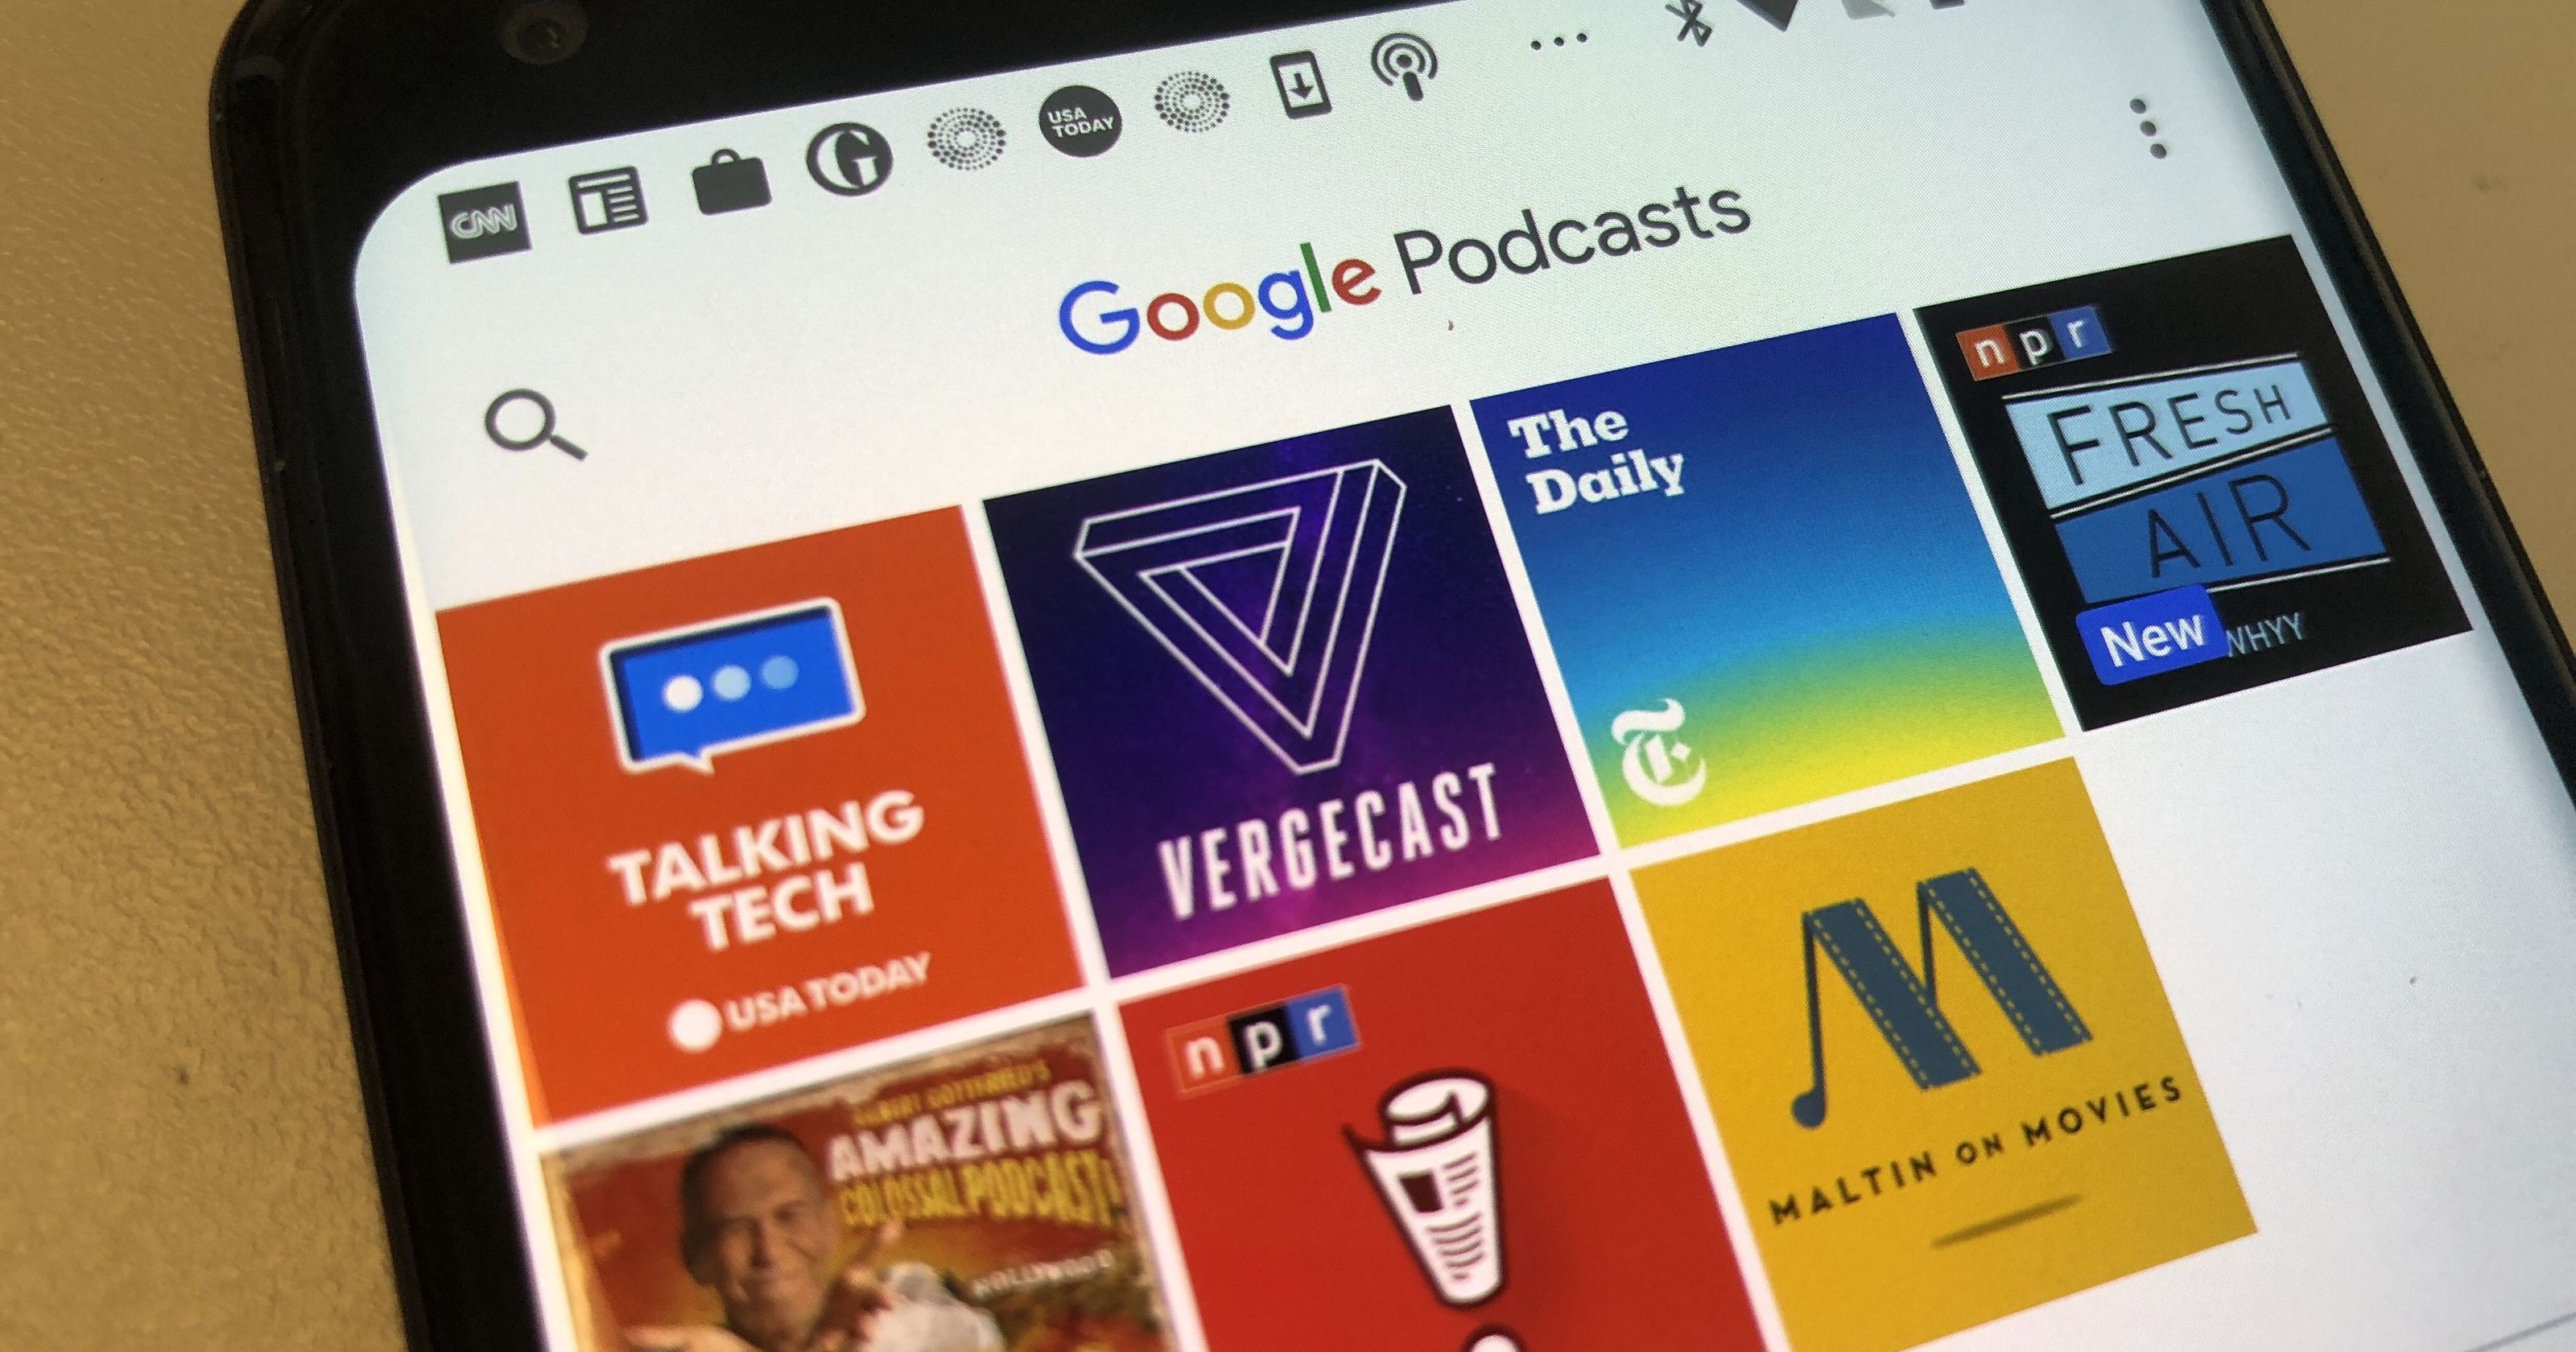 Google Podcast app may soon be coming to a desktop near you